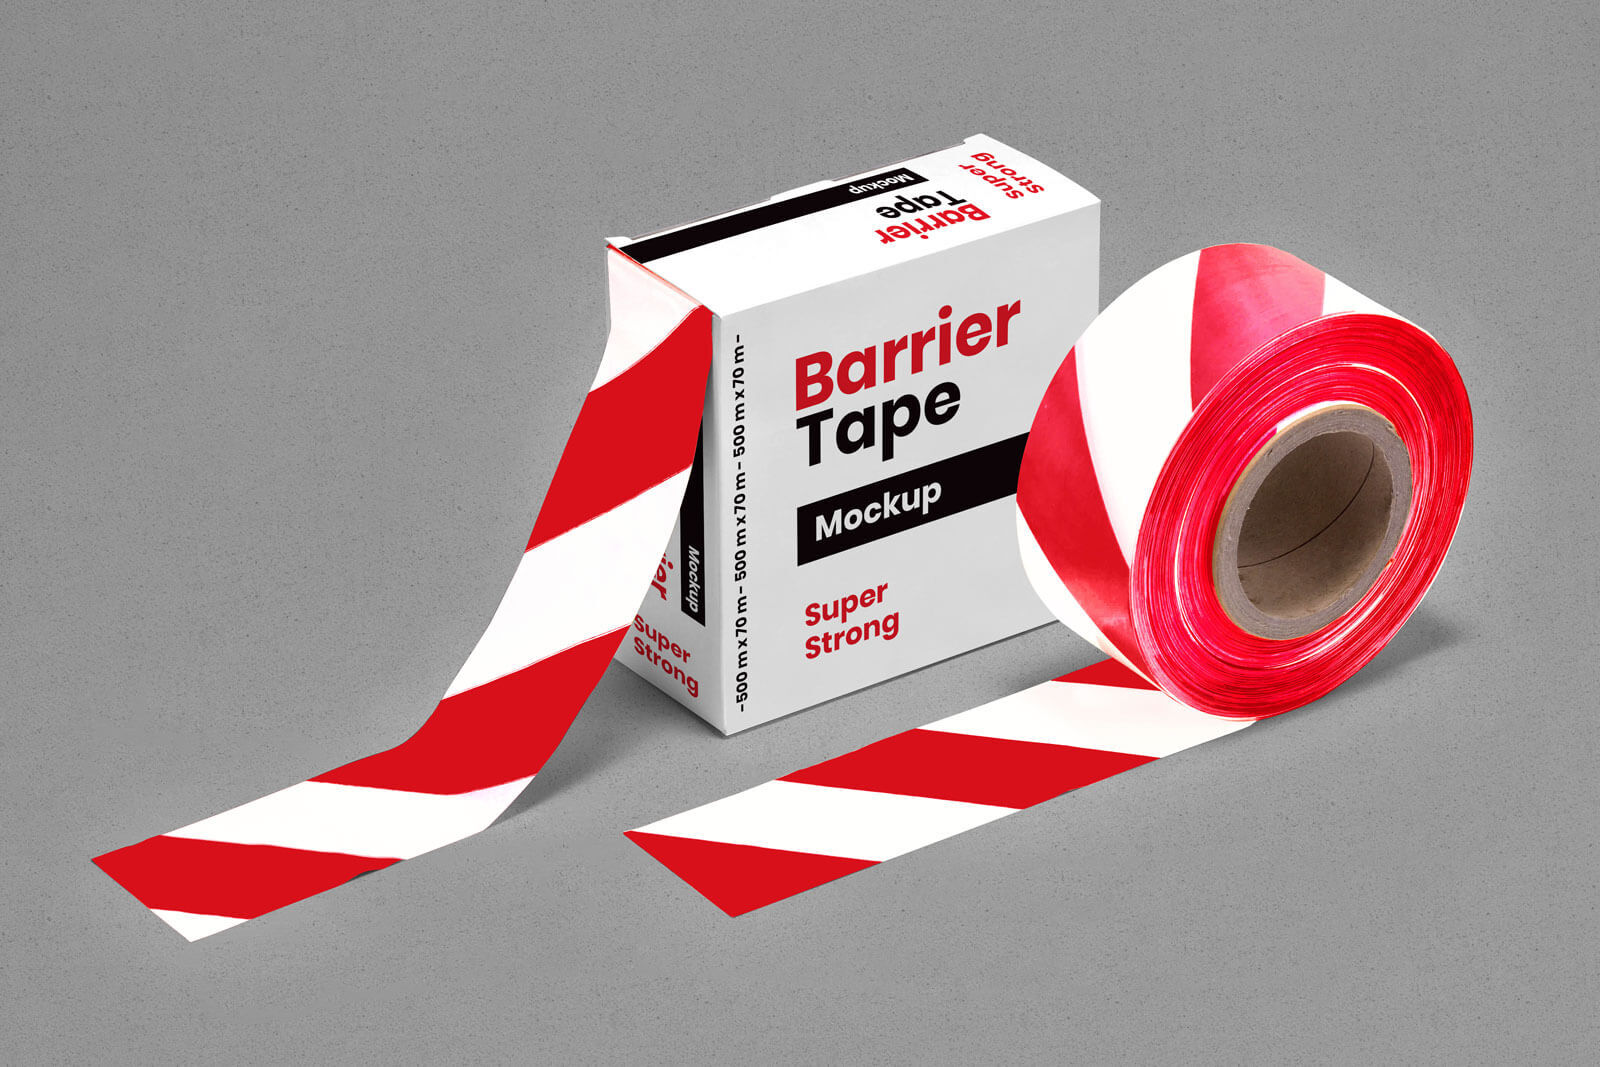 3/4 View of a Barrier/Barricade Tape Box Mockup FREE PSD